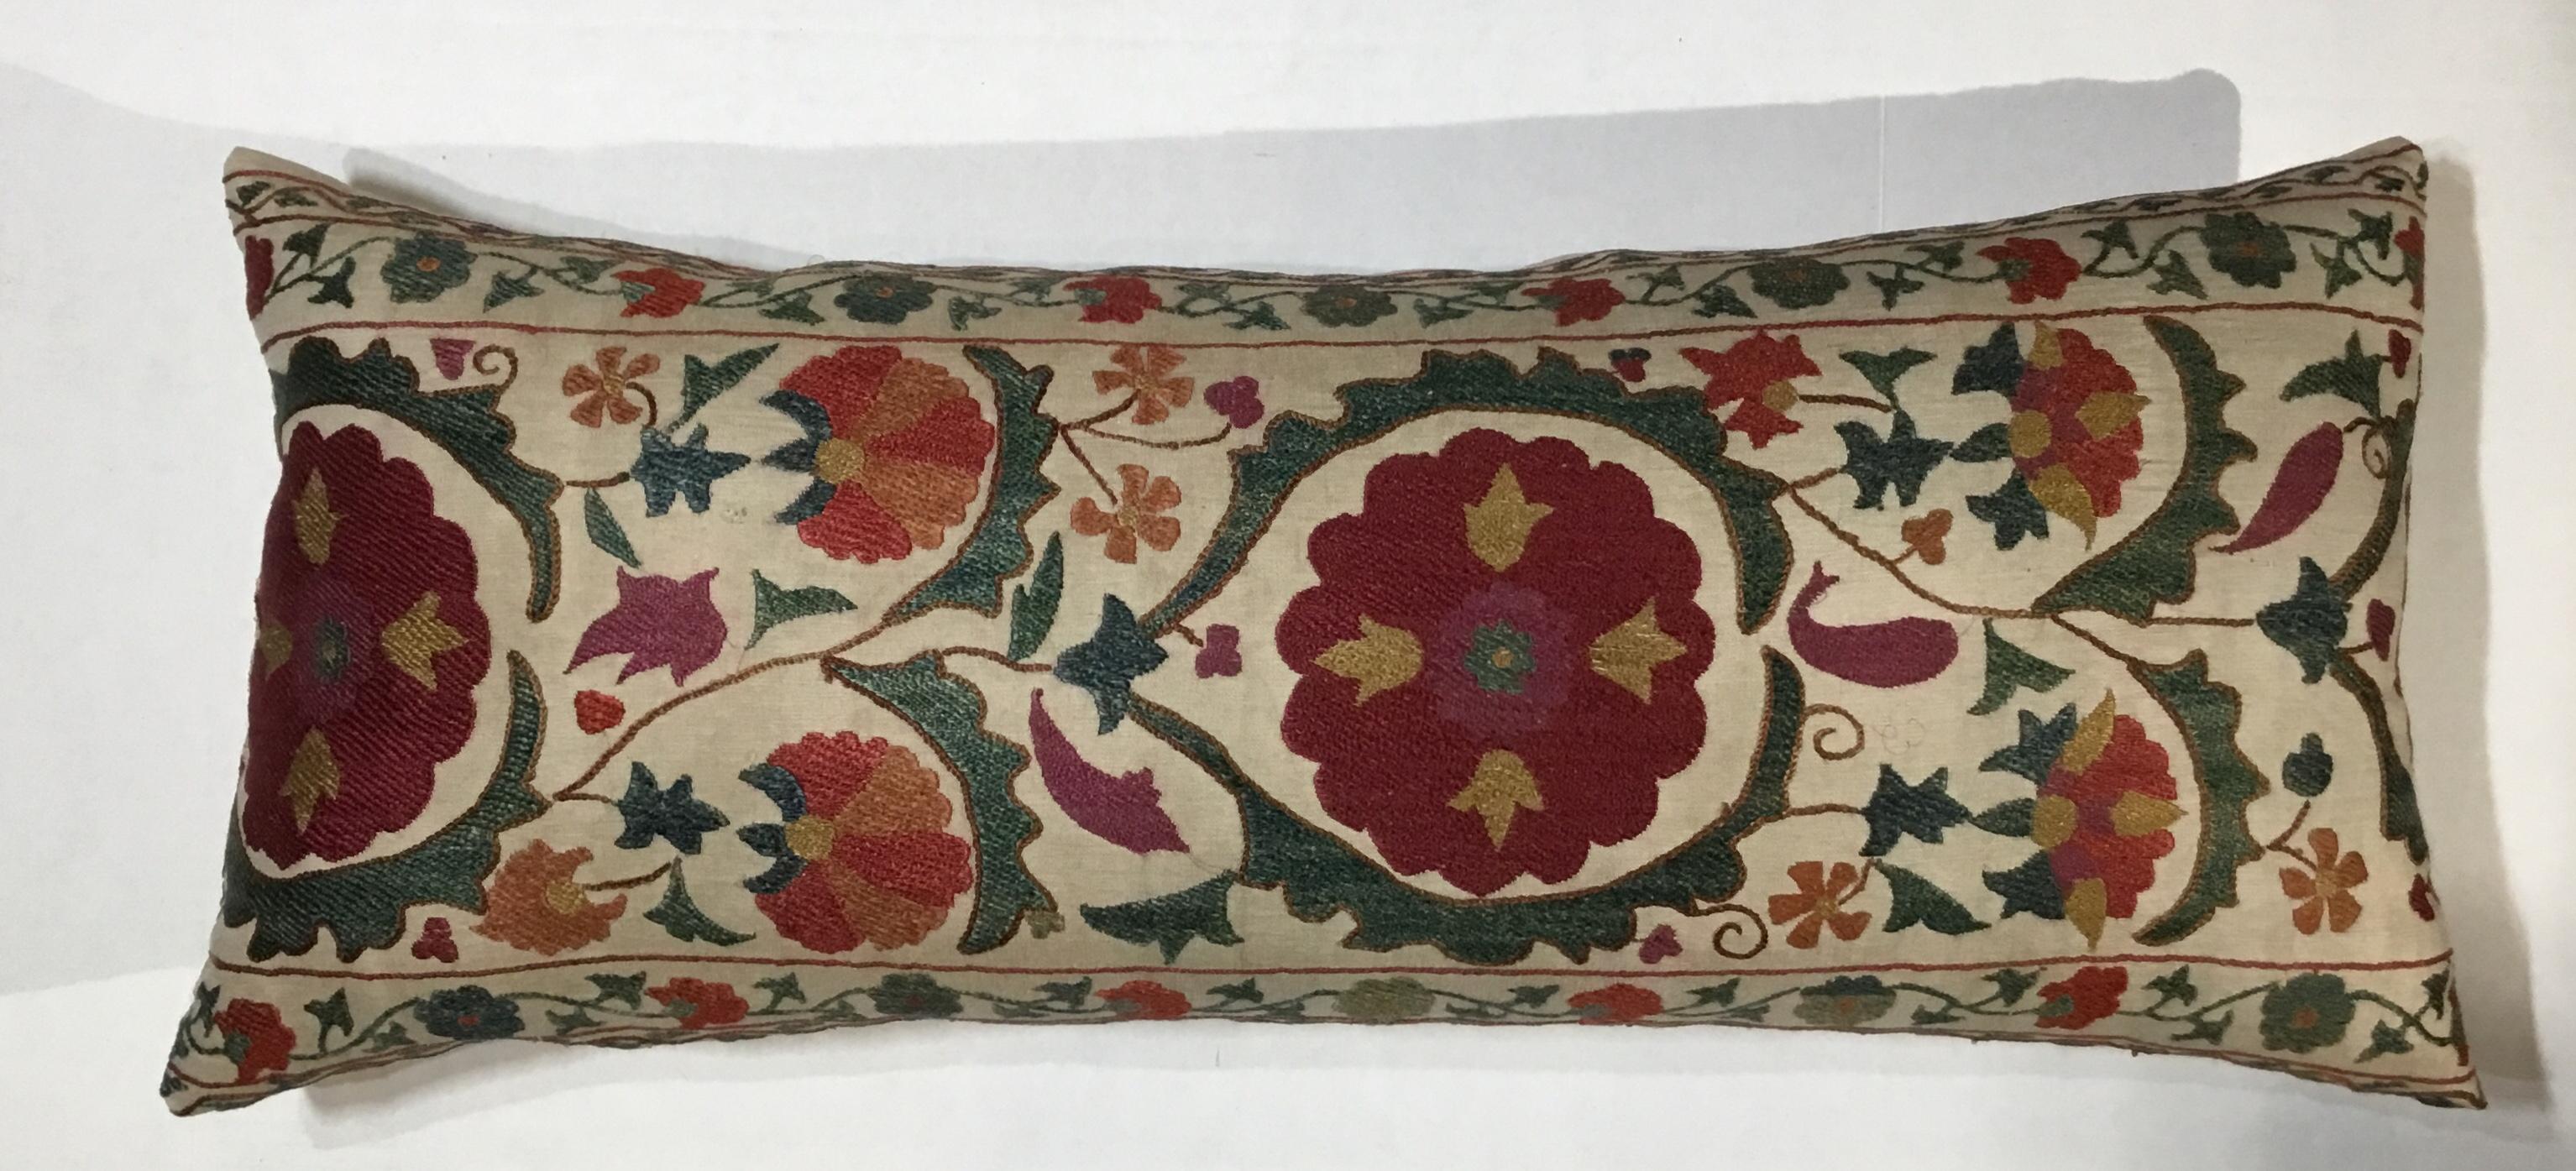 Hand Embroidered Suzani Pillow 2